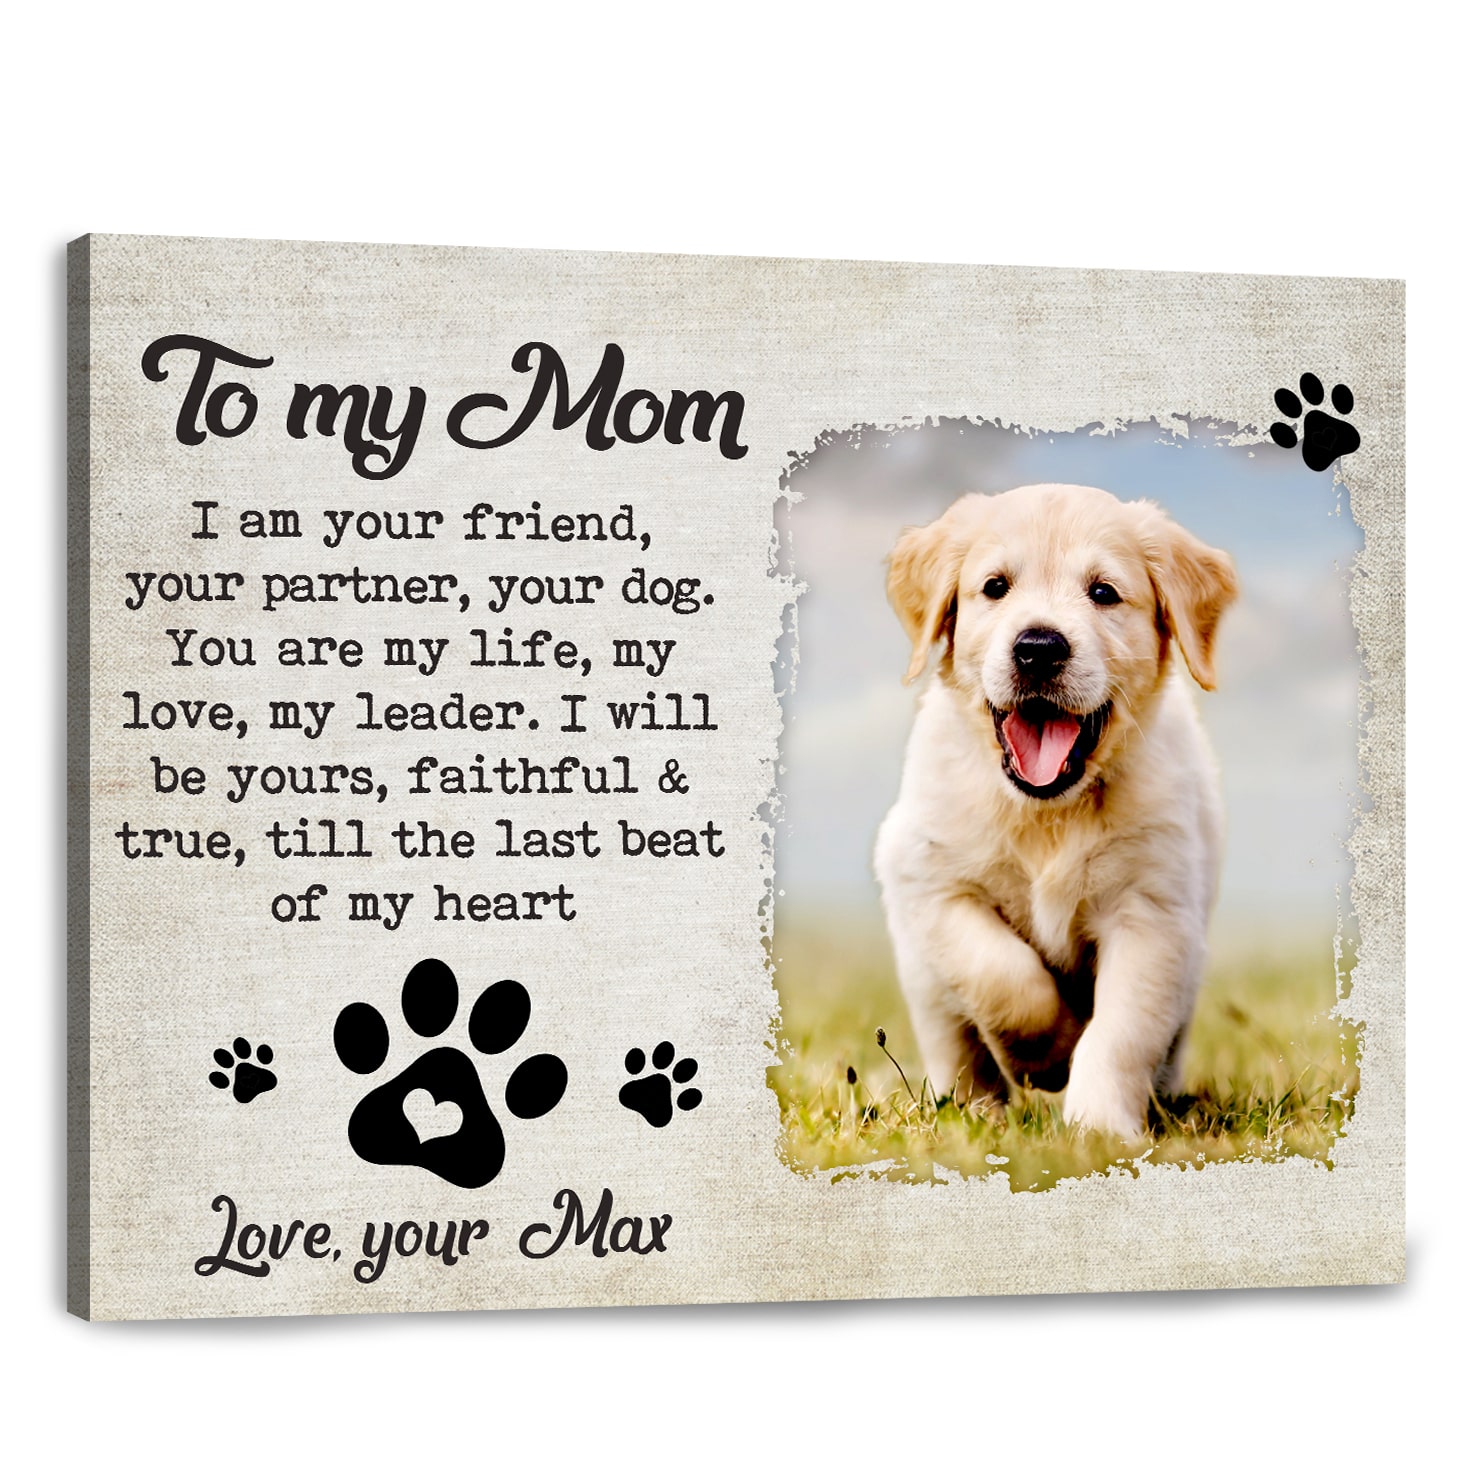 https://images.ohcanvas.com/ohcanvas_com/2022/03/10025201/happy-mothers-day-dog-mom-personalized-gift-for-dog-mom-i-am-your-friend-your-partner.jpg